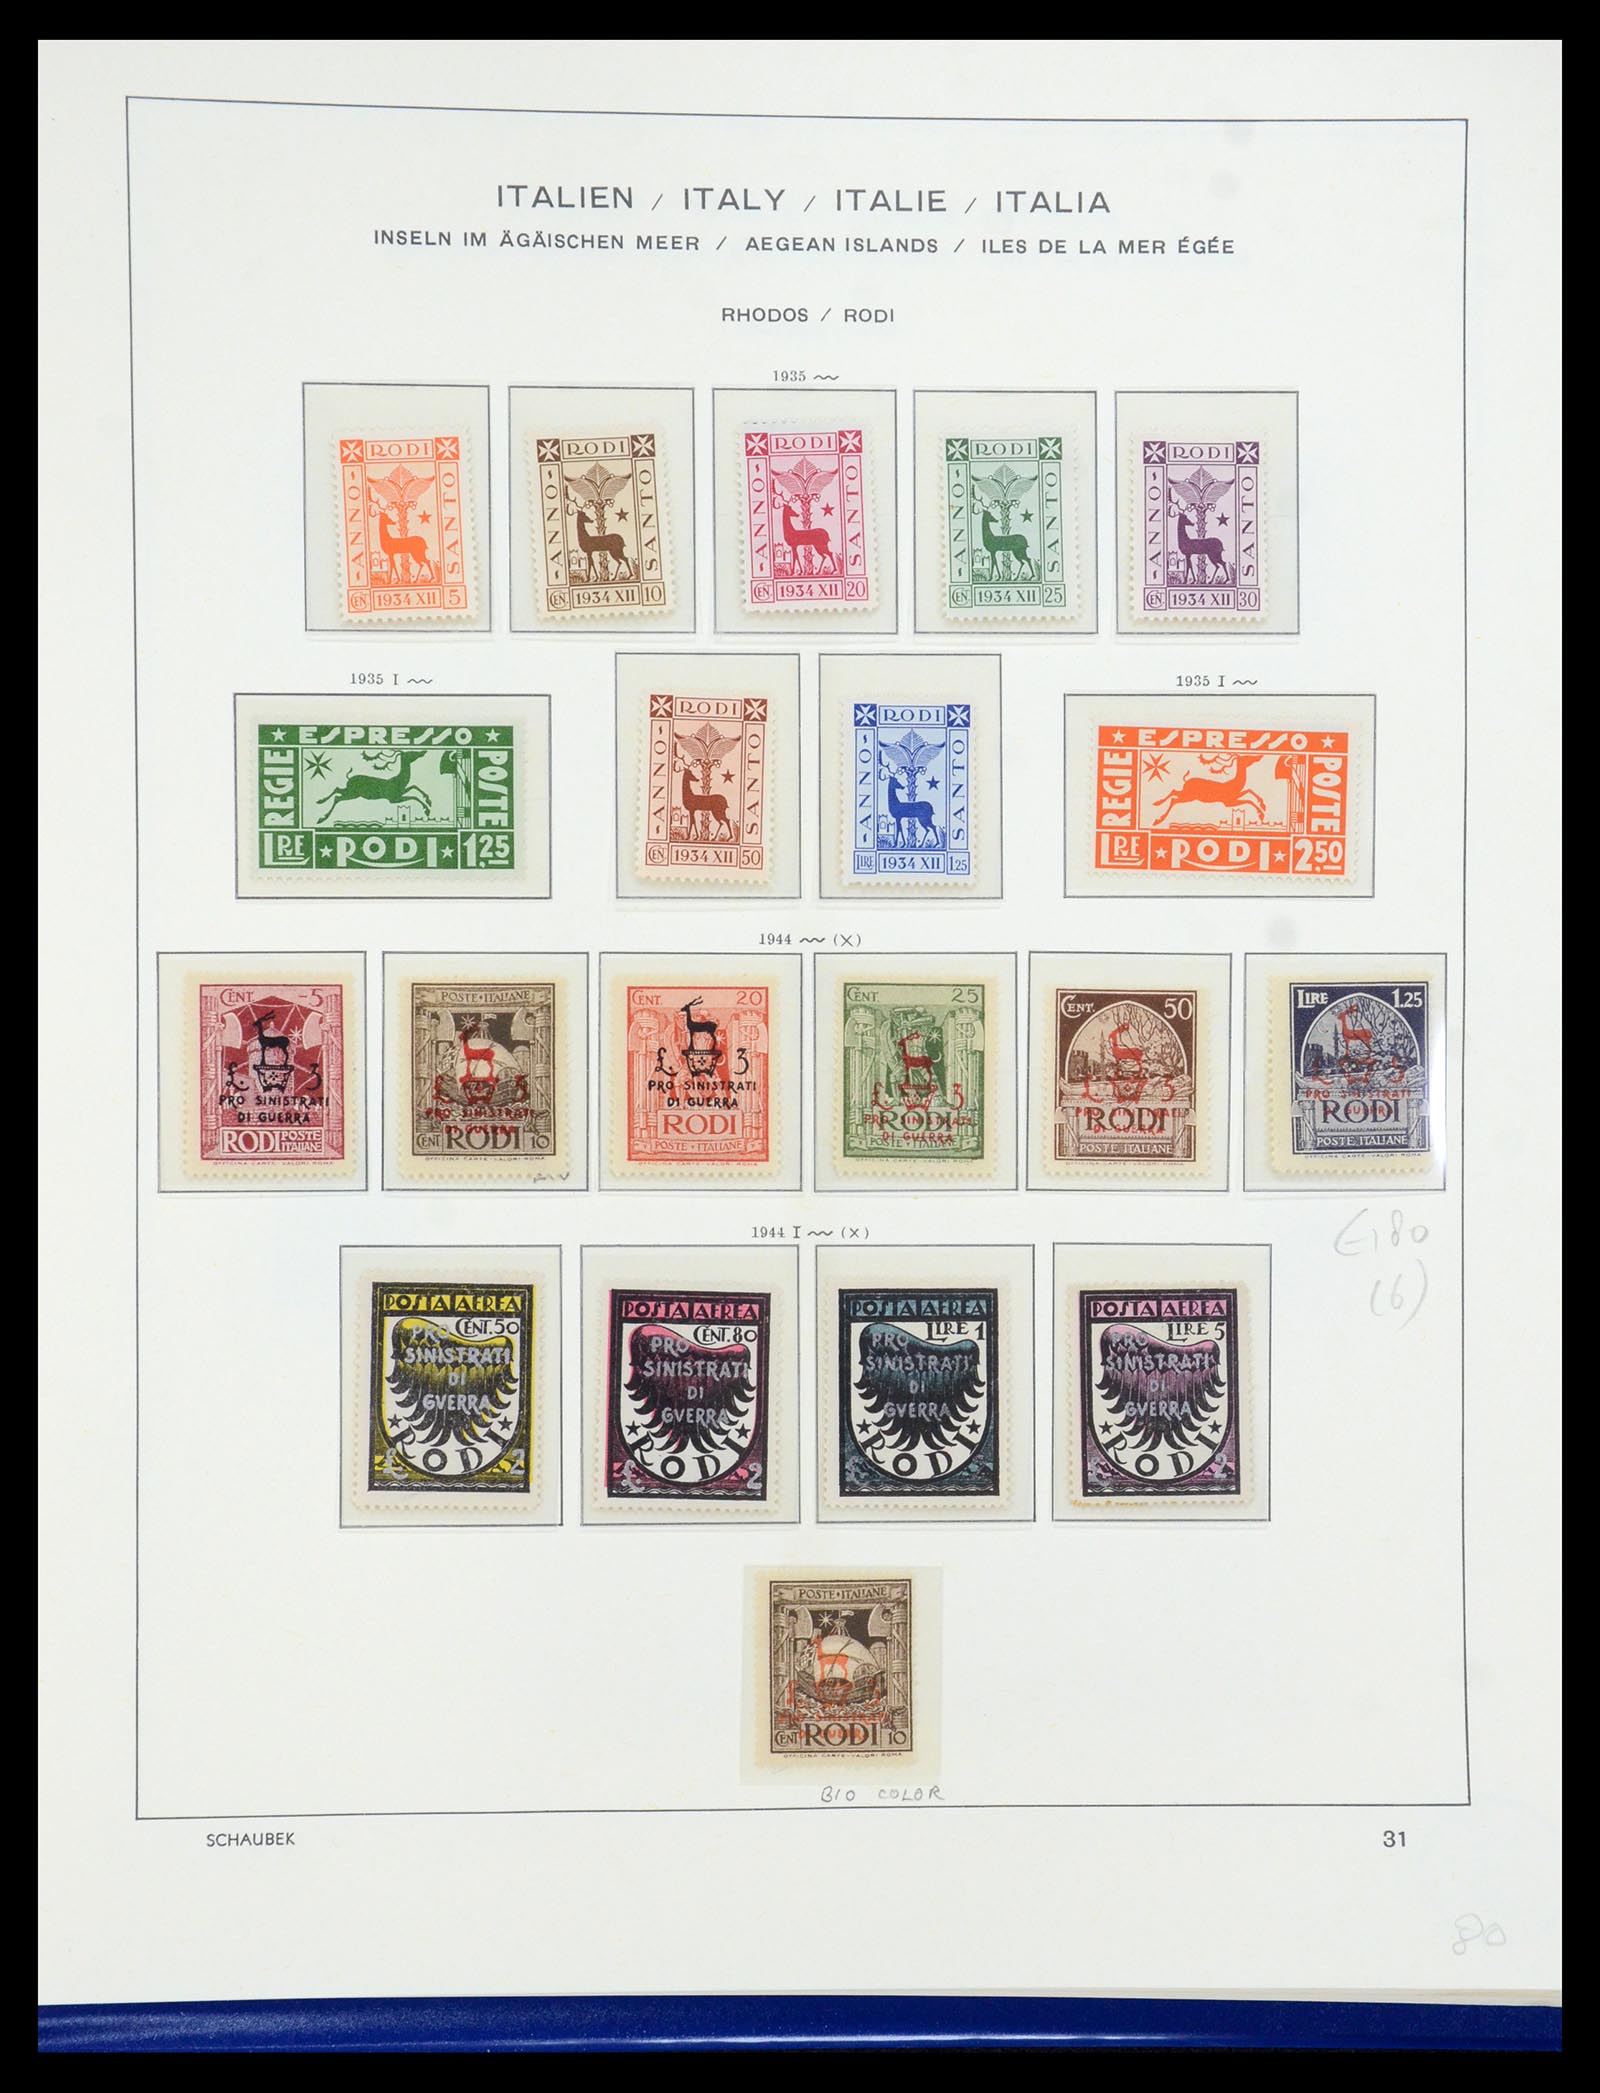 36181 044 - Stamp collection 36181 Italian Aegean Islands 1912-1941.